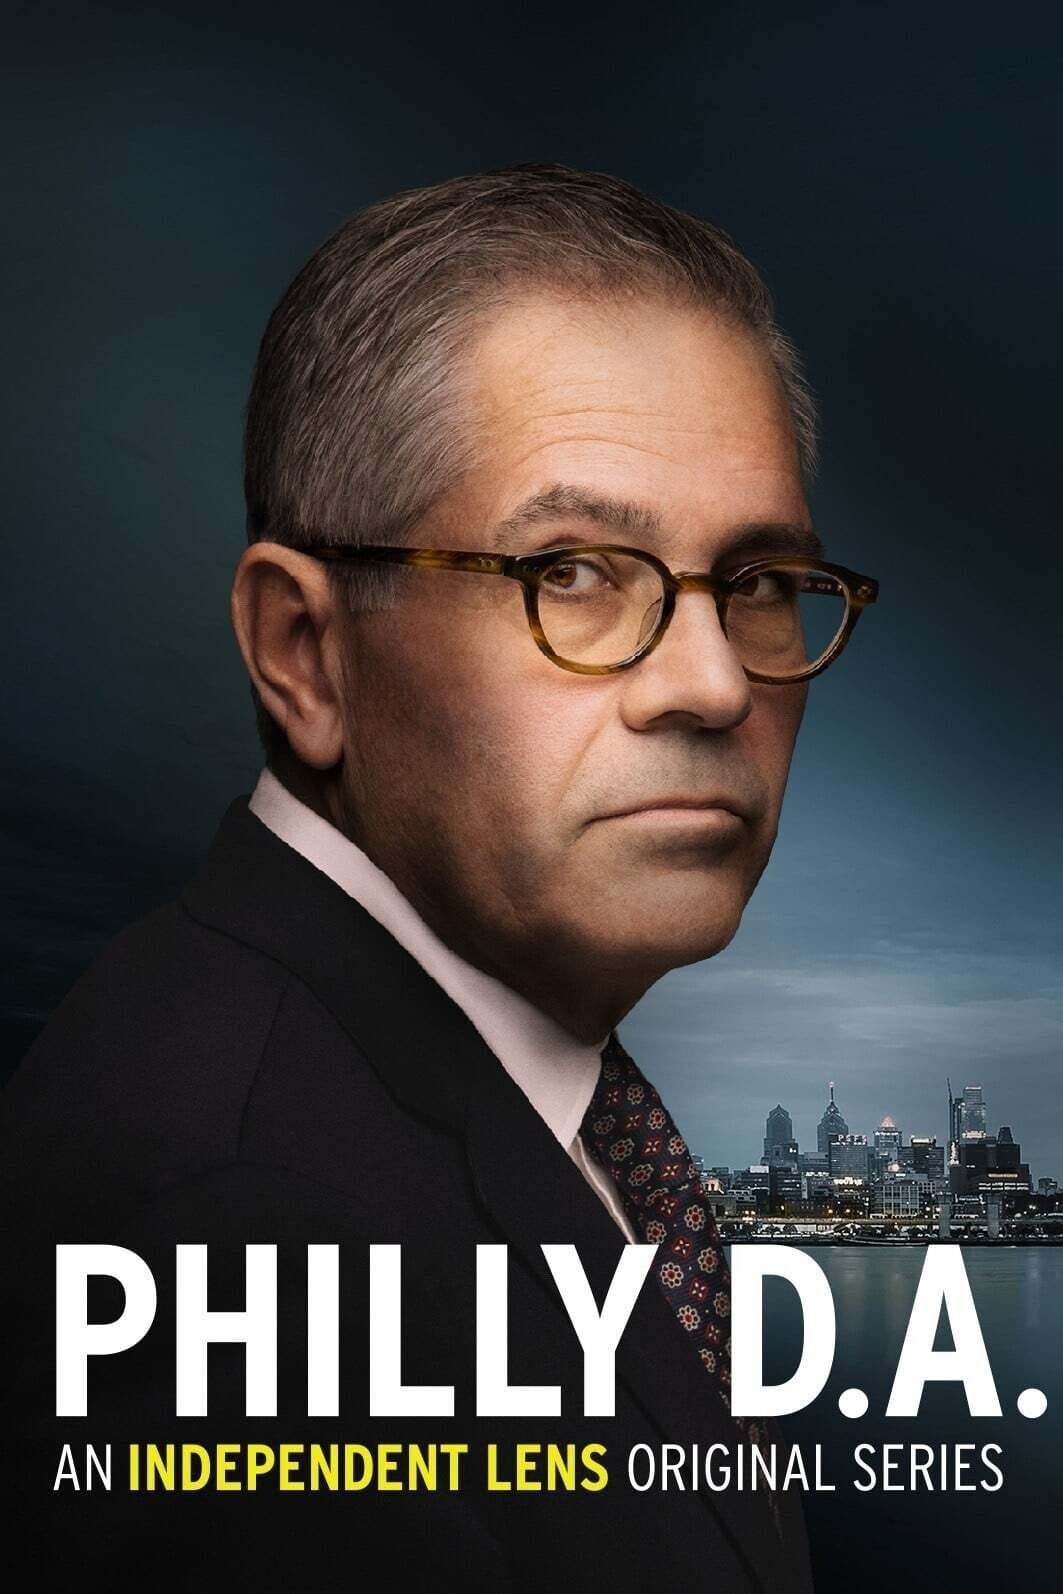 Philly D.A. TV Shows About District Attorney